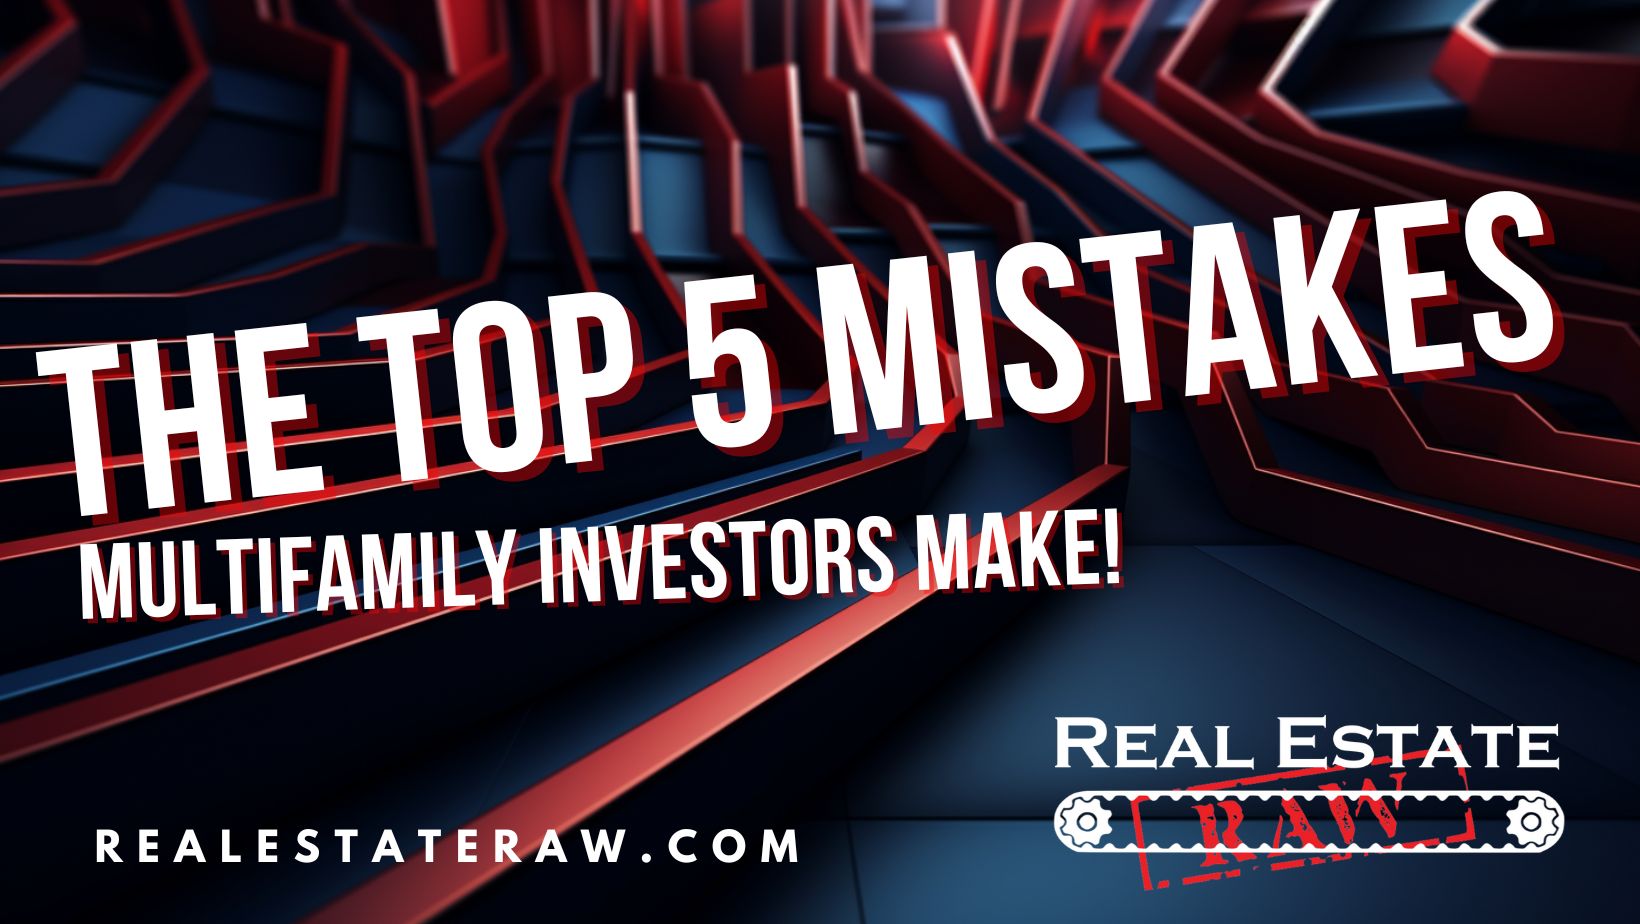 The Top 5 Mistakes Multifamily Investors Make